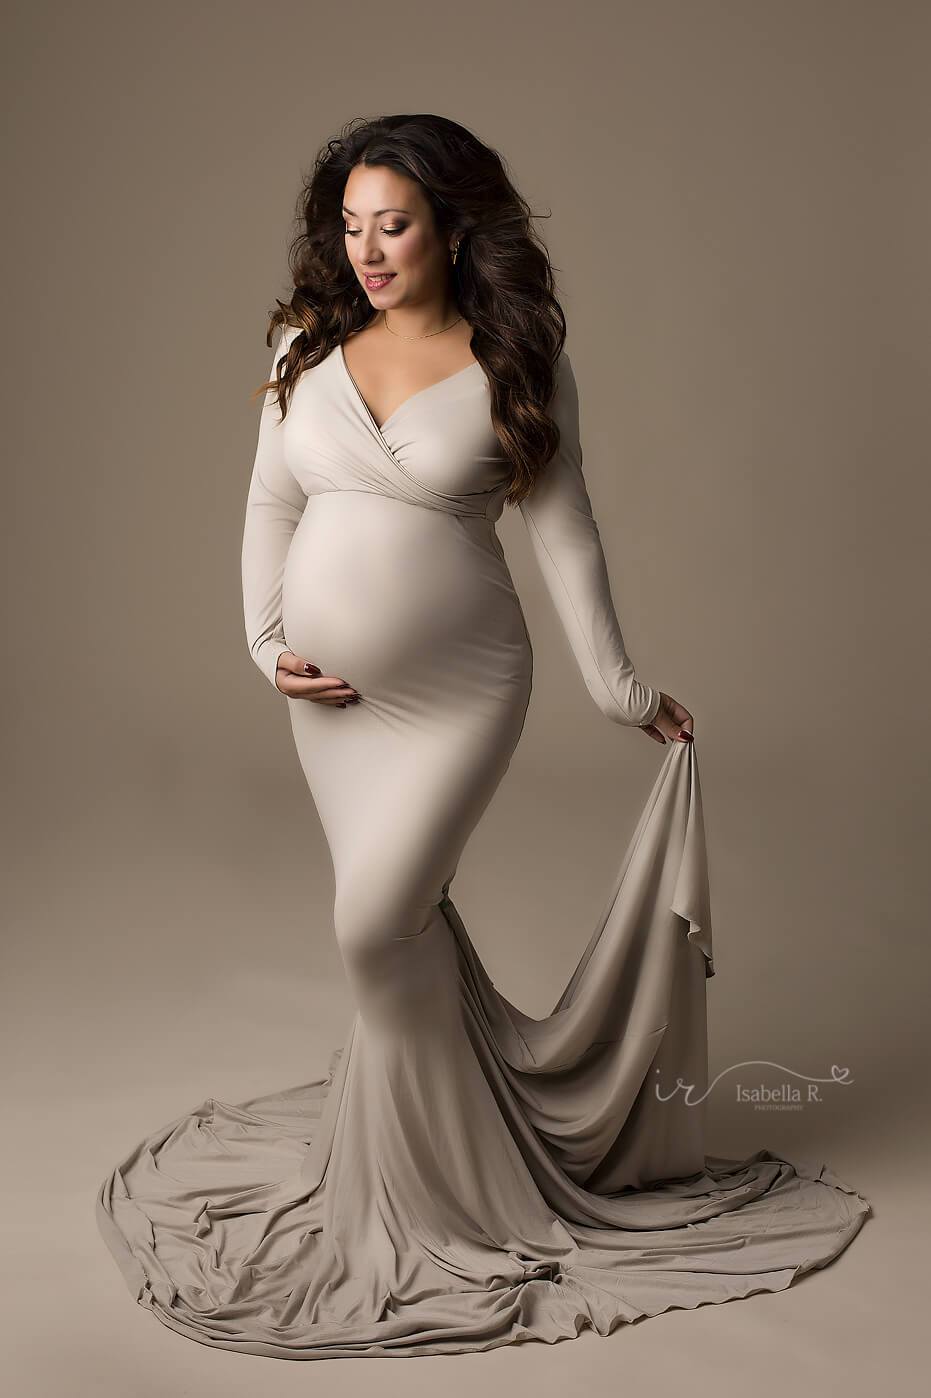 A pregnant woman is wearing a tight dress in the colour sand. The dress has a mermaid skirt. The woman is holding a piece of the skirt fabric in her hand. She has brown hair